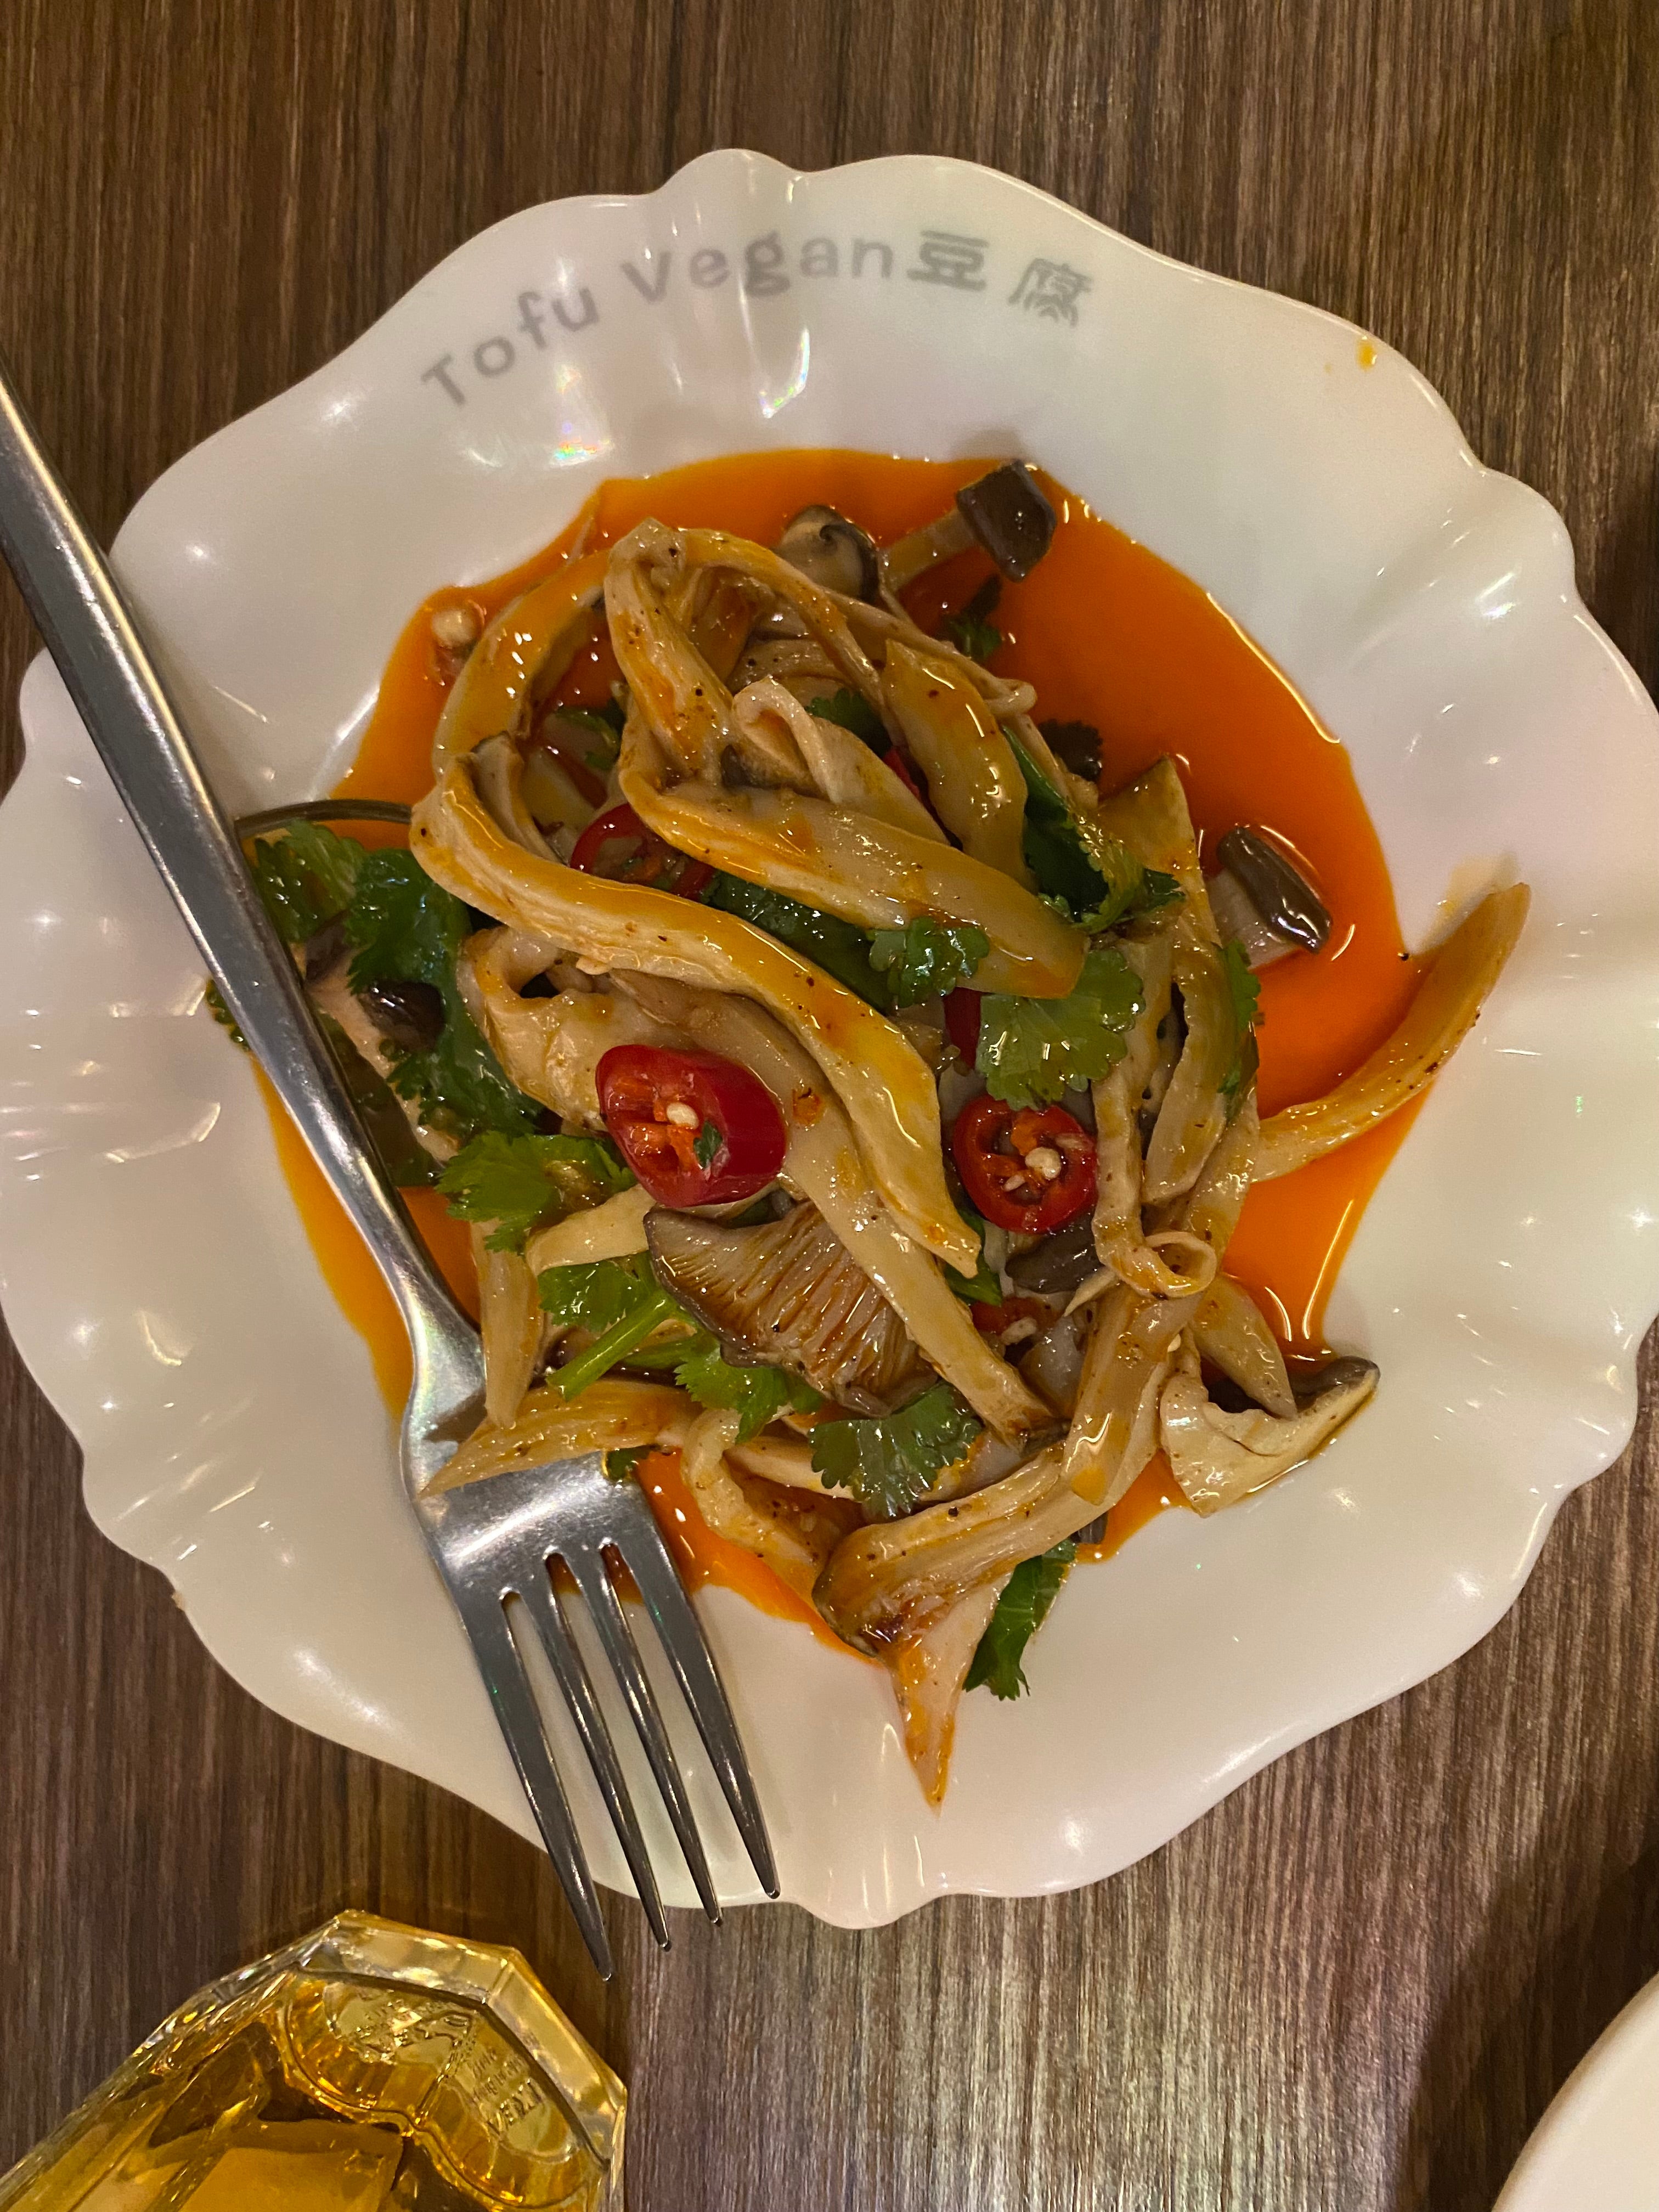 Tofu Vegan’s cold hand-shredded king oyster mushroom is ’something I could eat happily every week’